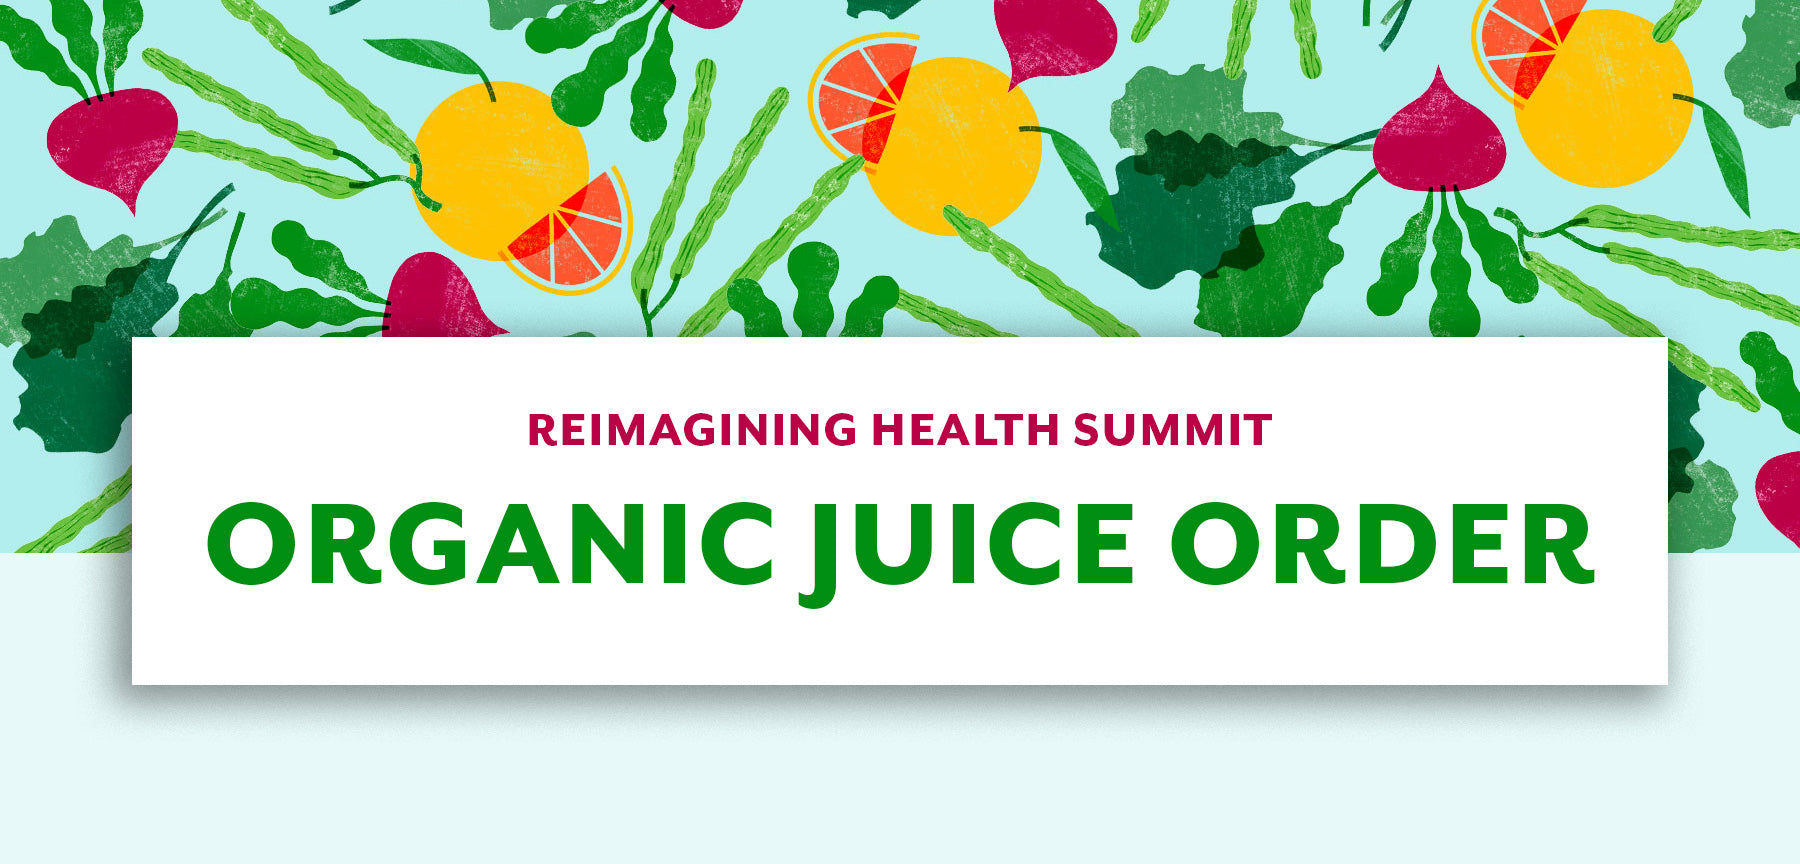 Pre order organic juices to enjoy during the Reimagining Health Summit in Fort Lauderdale. October 12th - October 13th.